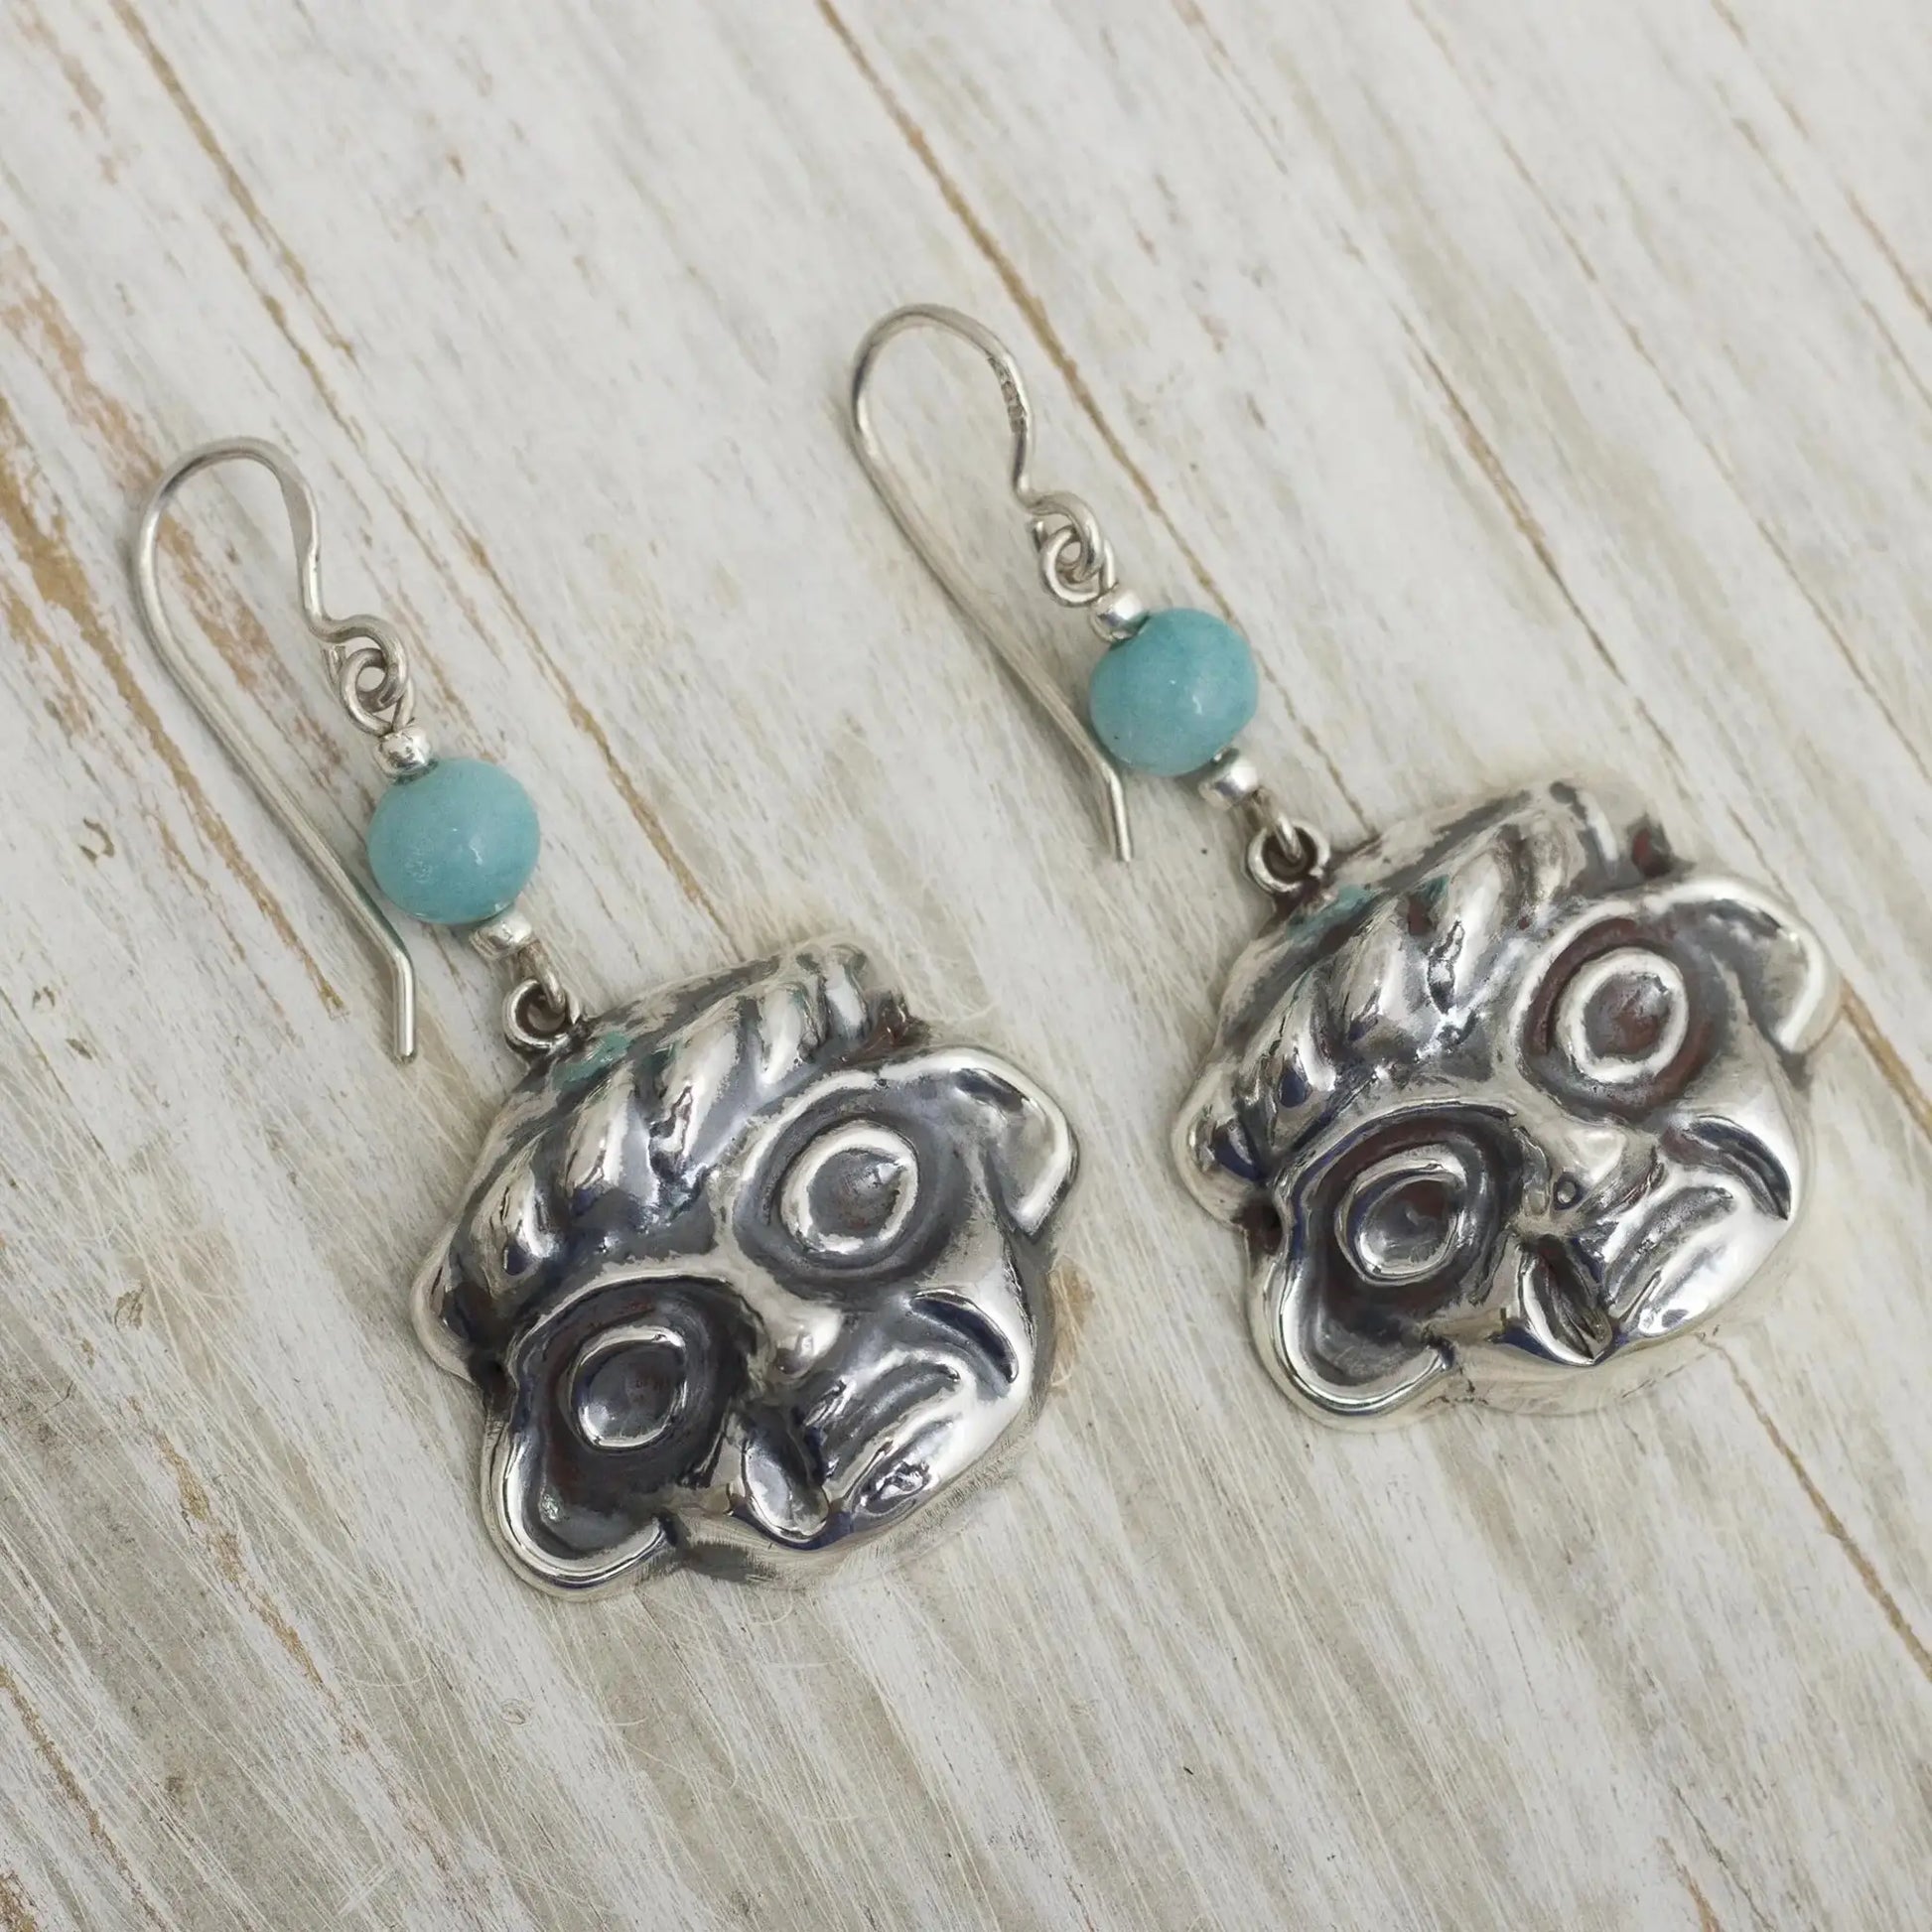 Chavin Memory - Silver Earrings with Amazonite - Jewelry